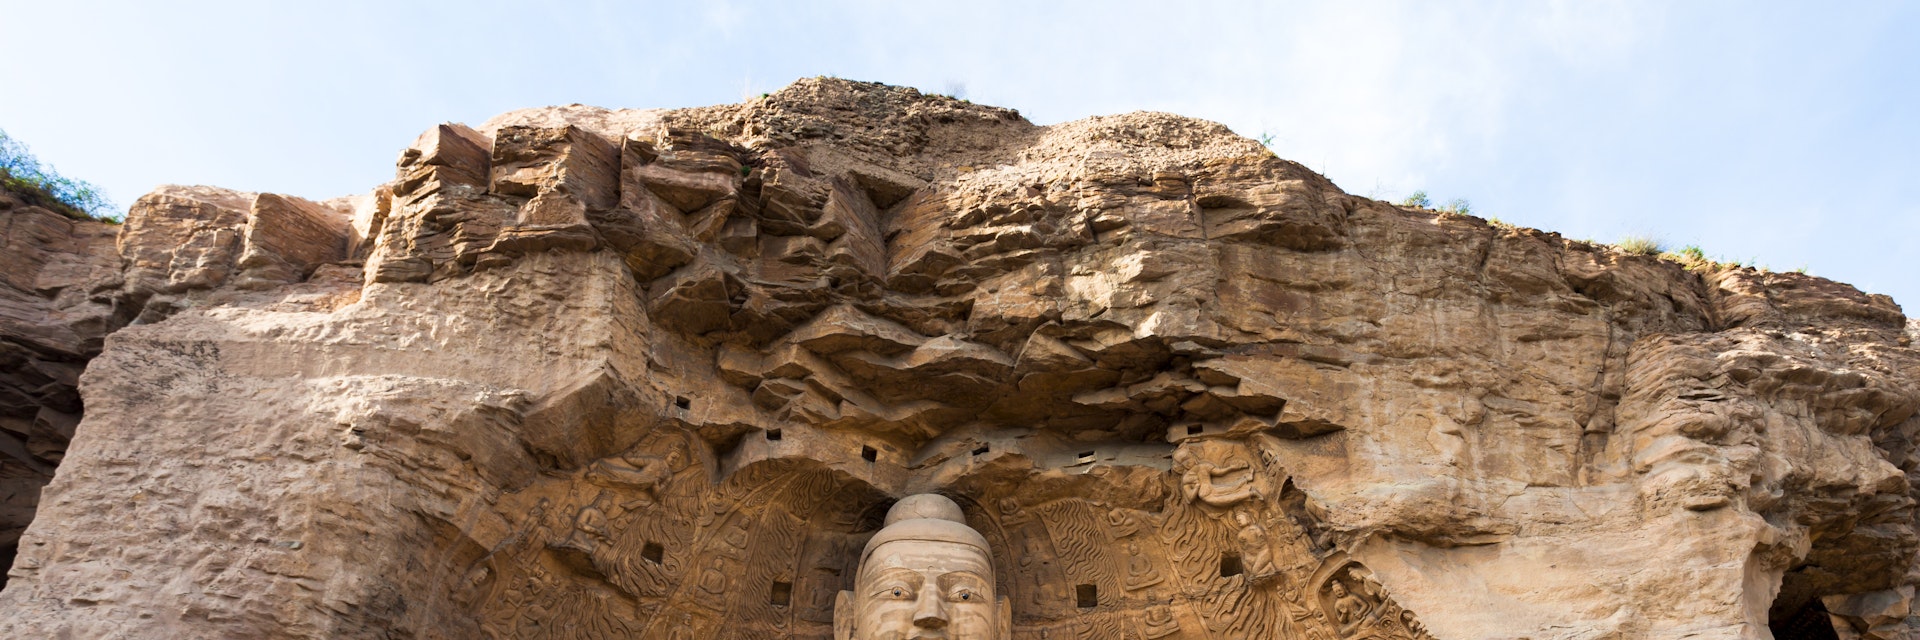 Built in 460-525 AD, the Yungang caves in Datong, China, are composed of 252 caves with more than 51,000 Buddha statues carved in the stone
471407199
Yungang Buddhist Caves, Stone - Object, Datong, Porcelain, Carving - Craft Product, Statue, Buddha, Buddhism, Religion, Spirituality, Shanxi Province - North East China, China - East Asia, Asia, United Nations Educational, Scientific And Cultural Organization, UNESCO World Heritage Site